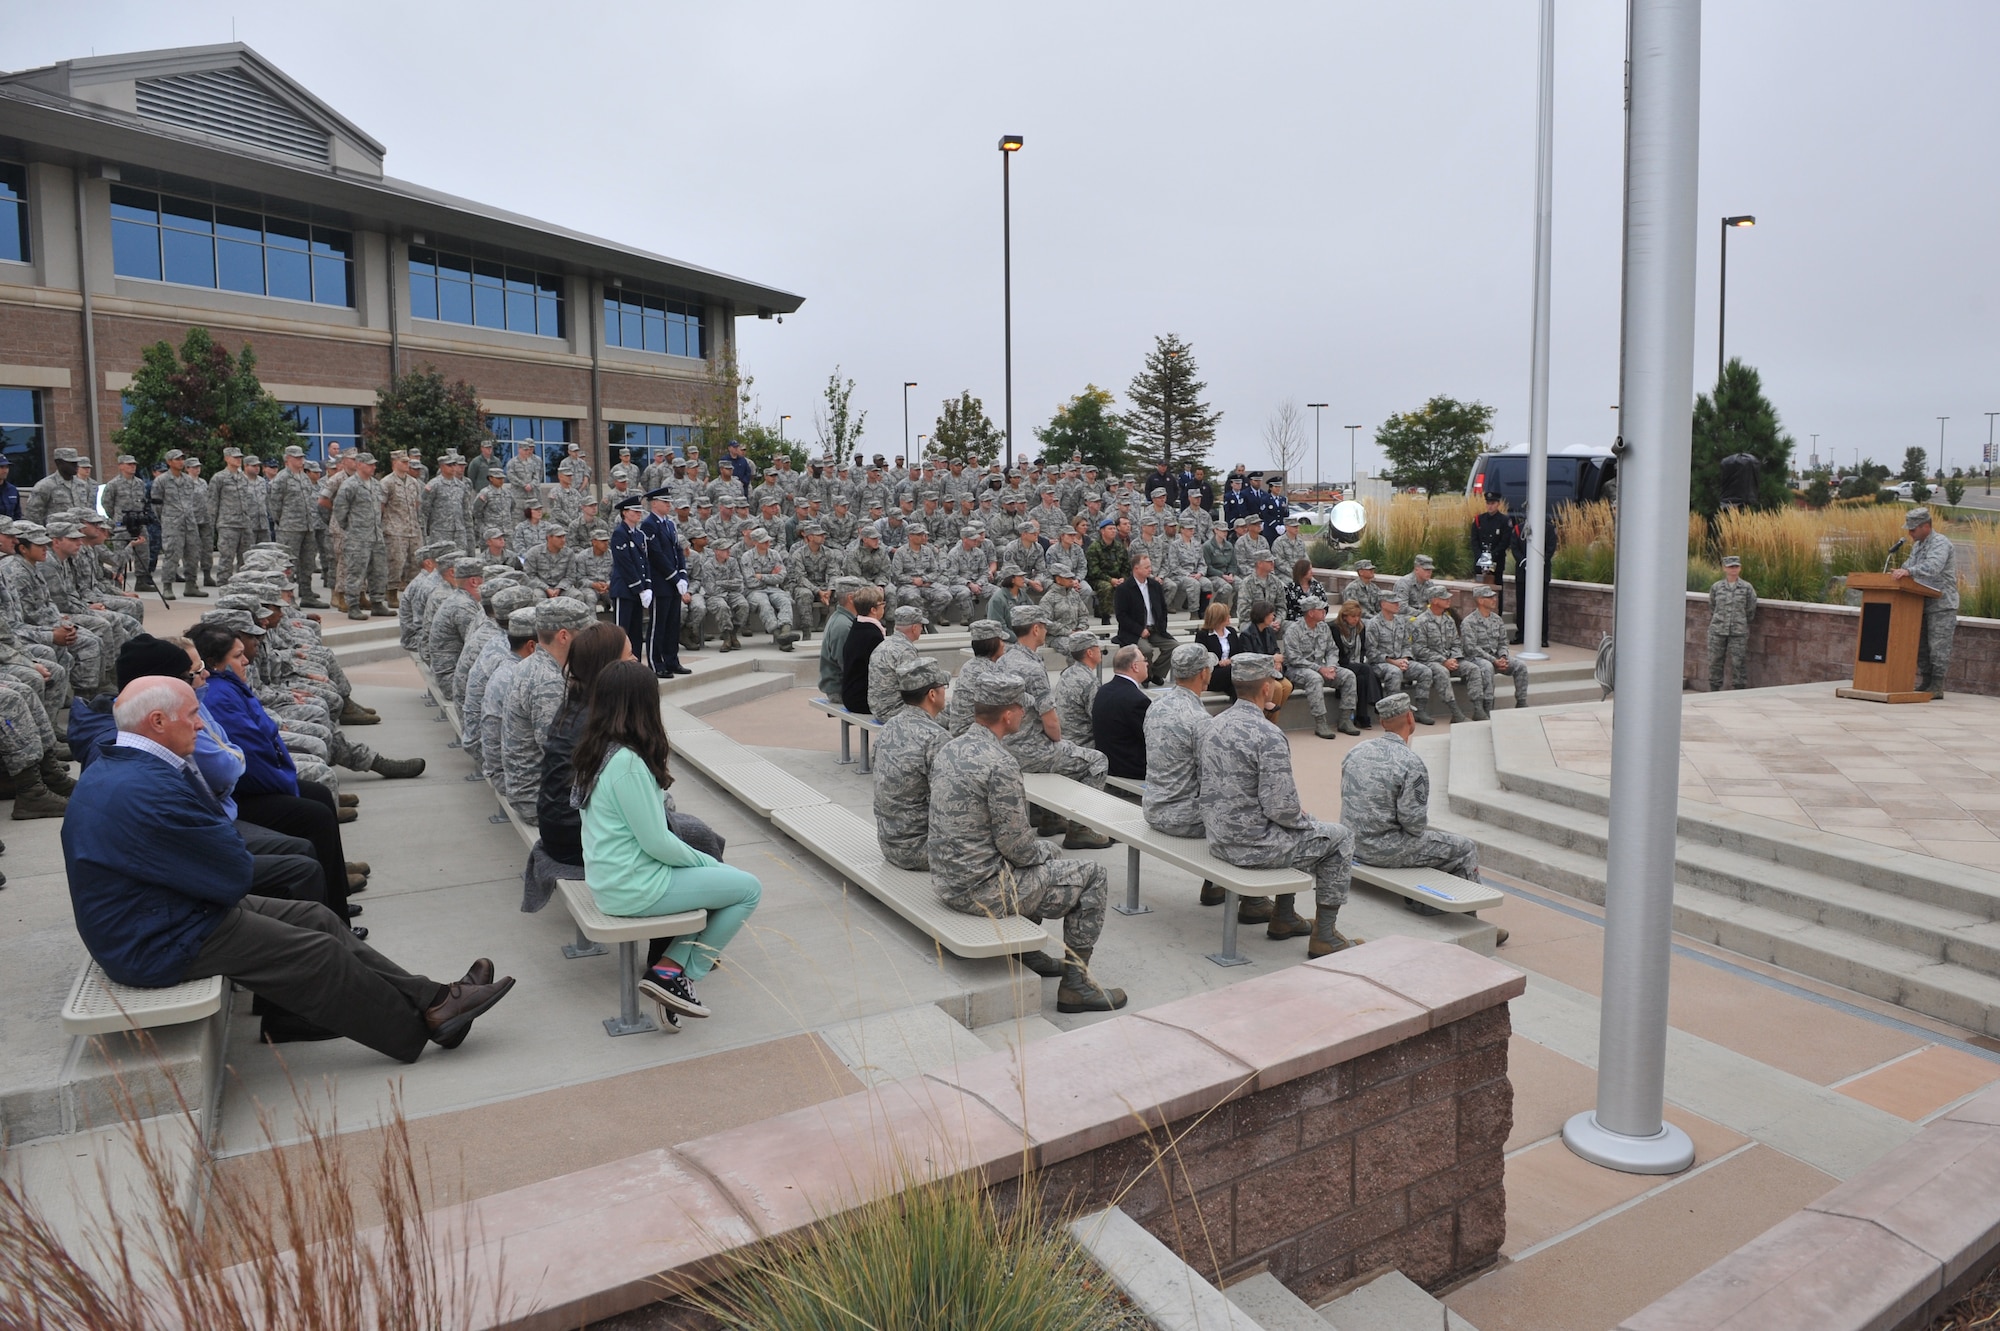 Col. John Wagner, 460th Space Wing commander, speaks during the Patriot Day retreat ceremony Sept. 11, 2014, on Buckley Air Force Base, Colo. Patriot Day is the national day of service and remembrance, in memory of the thousands killed on U.S. soil in the 9/11 attacks. (U.S. Air Force Photo by Airman Emily E. Amyotte/Released)